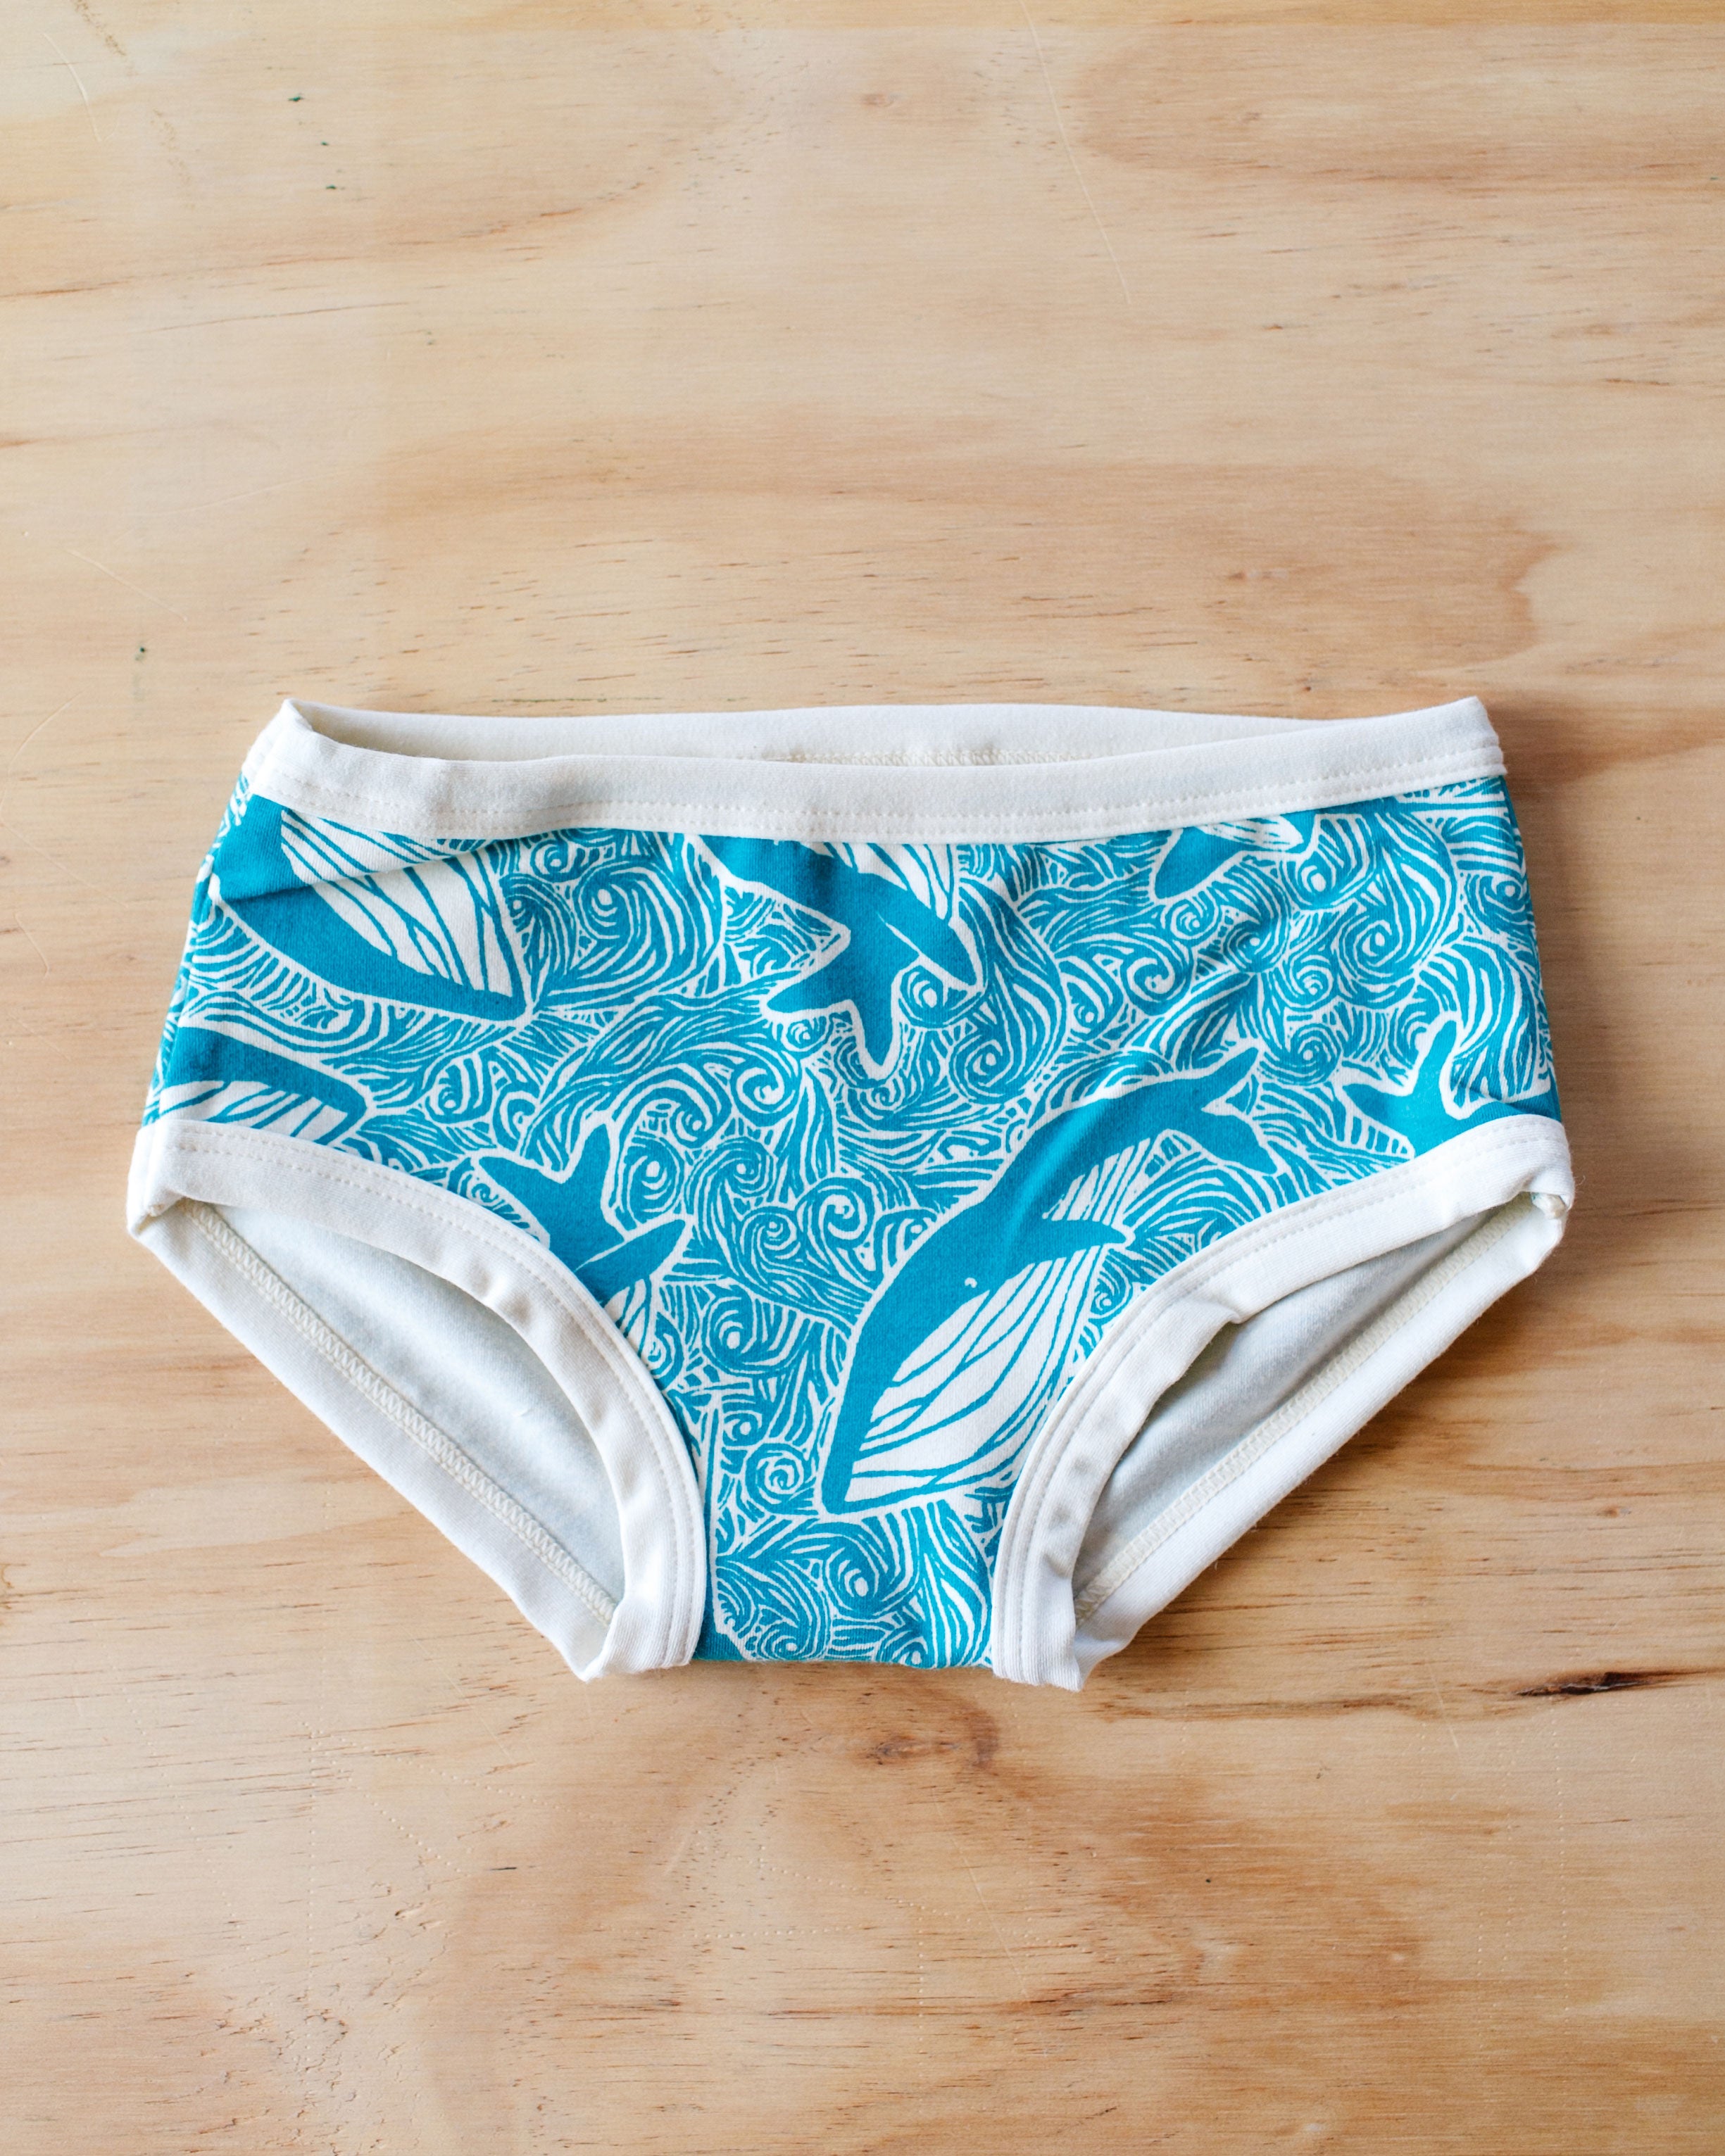 Flat lay of Thunderpants organic cotton Kids underwear in our Marine Whale print: teal whales and ocean with Vanilla binding.